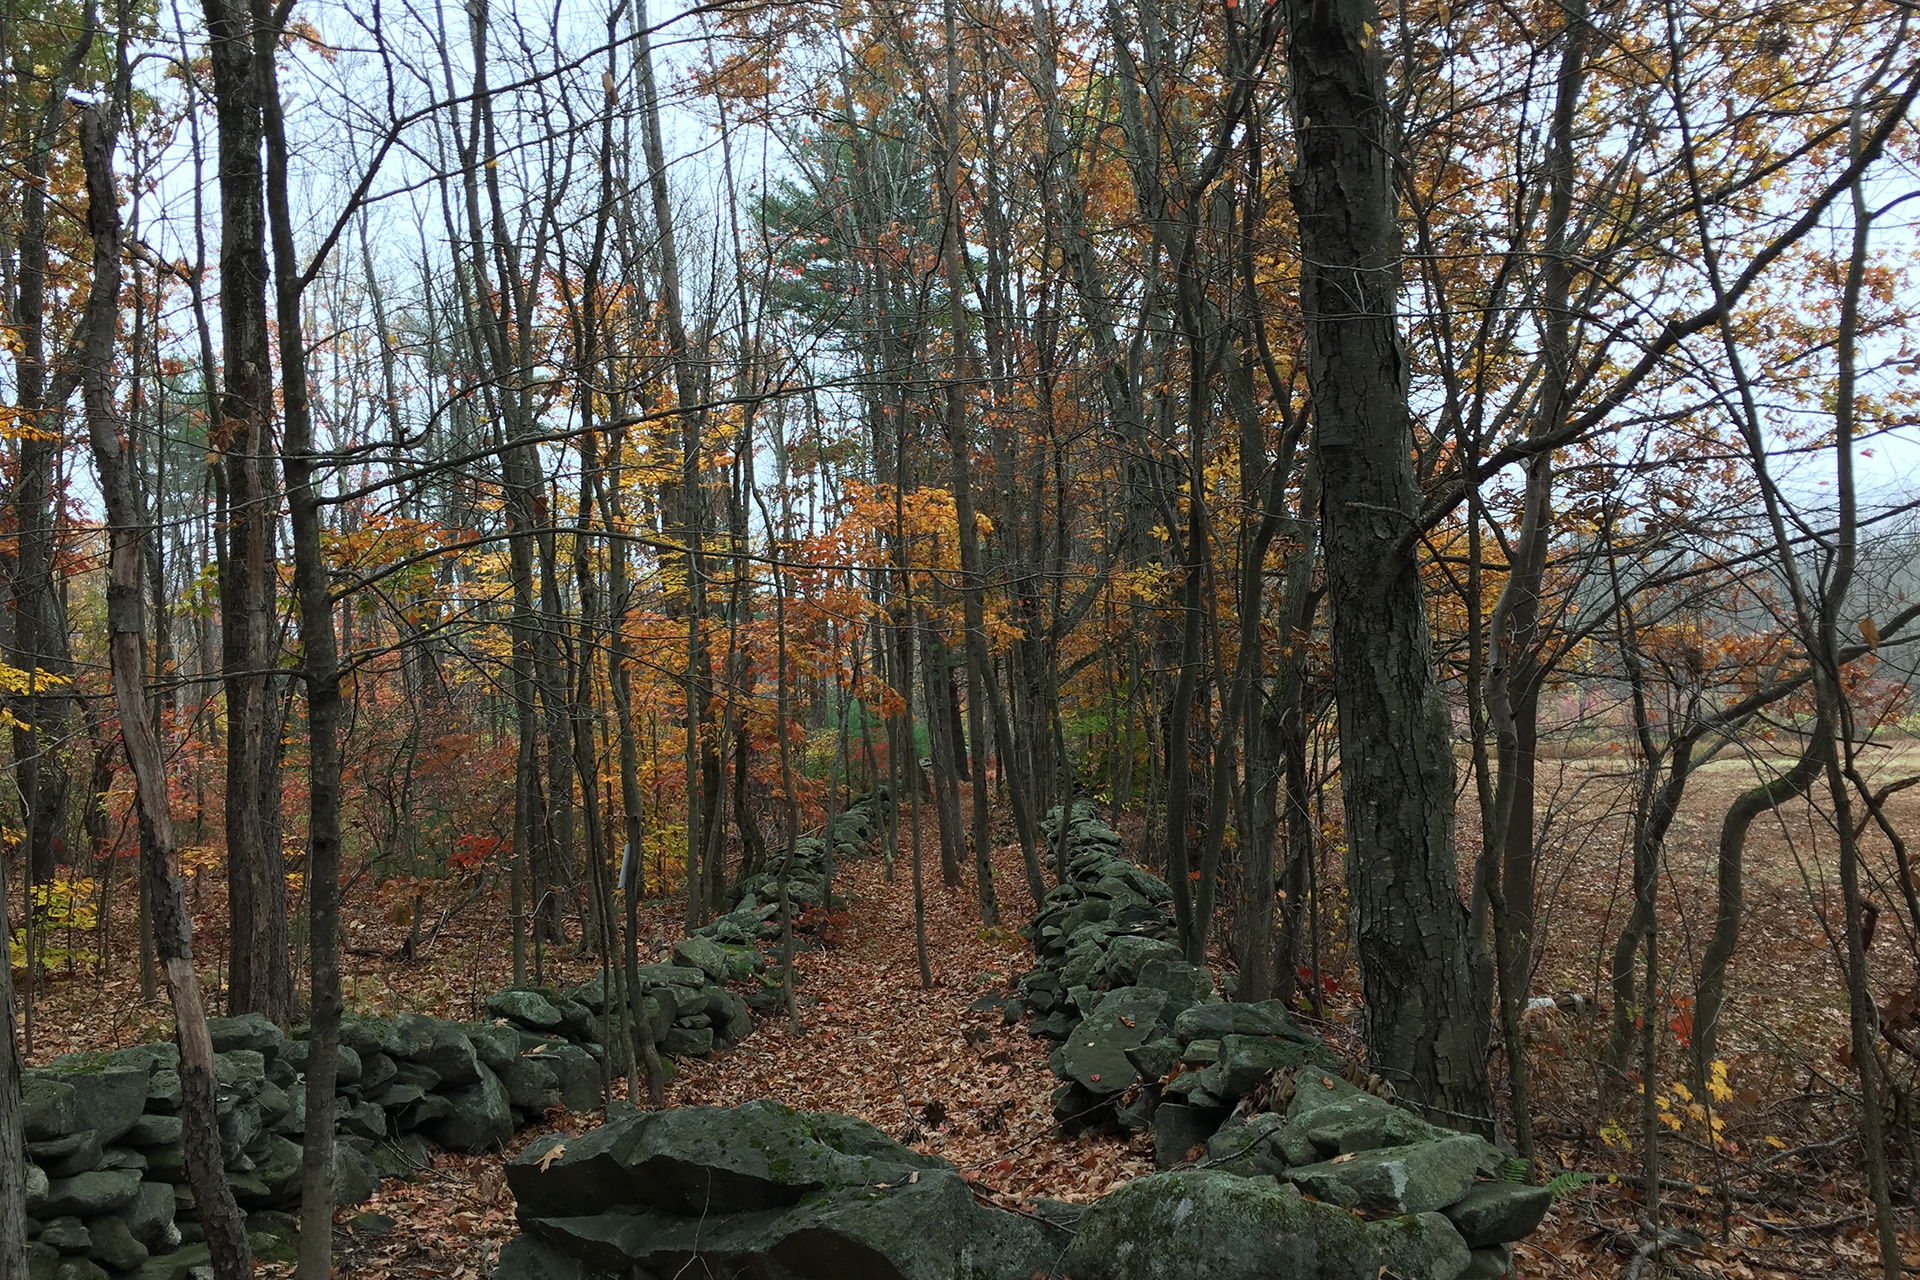 Stone wall separating Holder property (left) from Wachusett Meadow Wildlife Sanctuary (right)